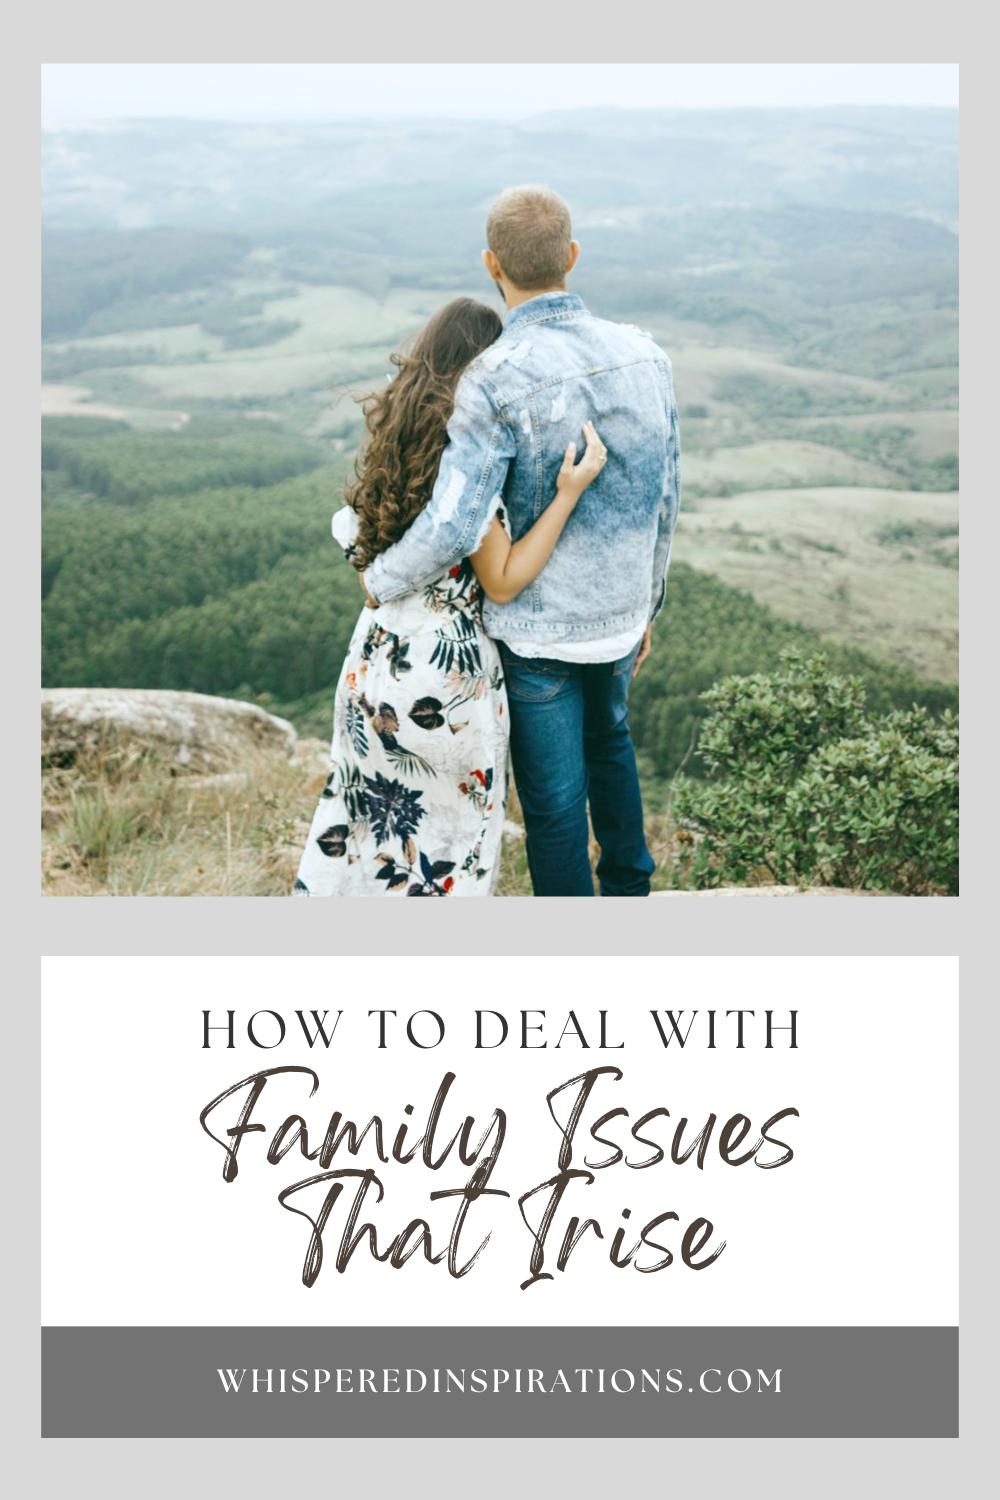 A banner reads, "How to Deal with Family Issues That Arise at All Stages' in life. A young couple poses in front of a hillside facing towards the edge.